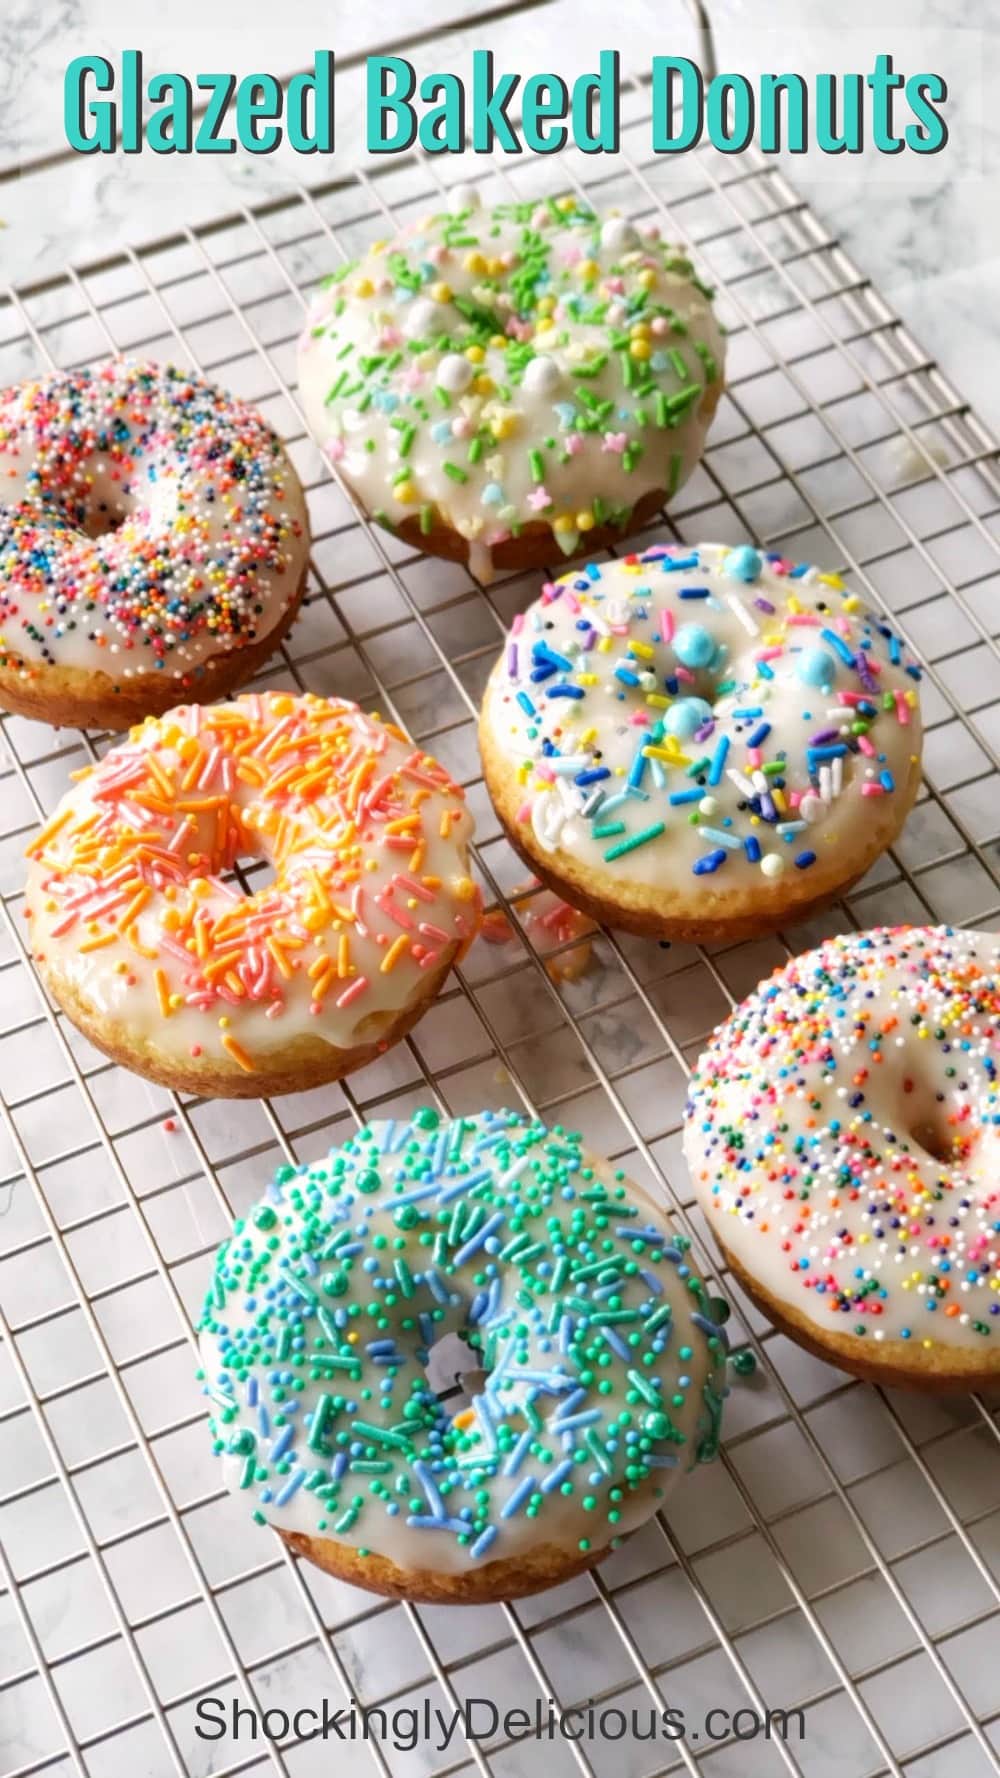 6 Glazed Baked Donuts with sprinkles on a cooling rack on a white counter